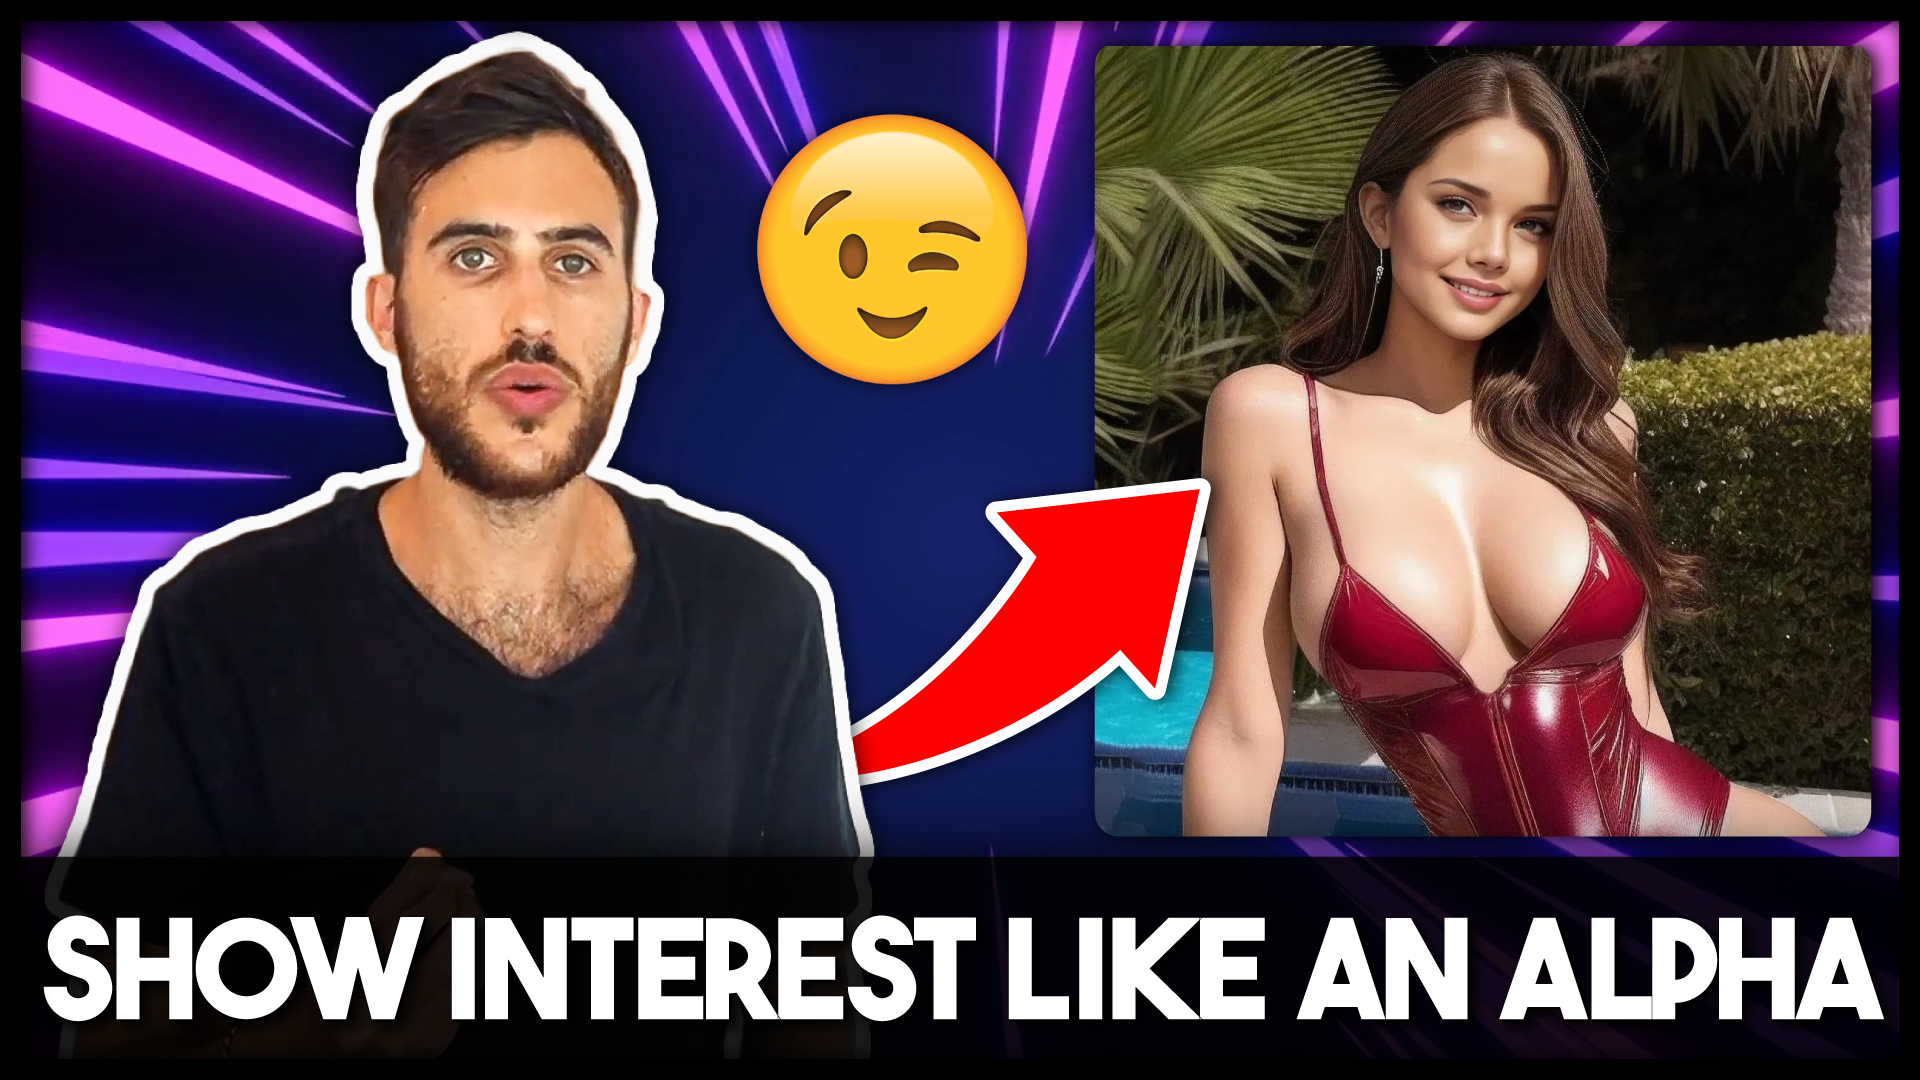 How to show interest like an ALPHA MALE (WOMEN WANT THIS)